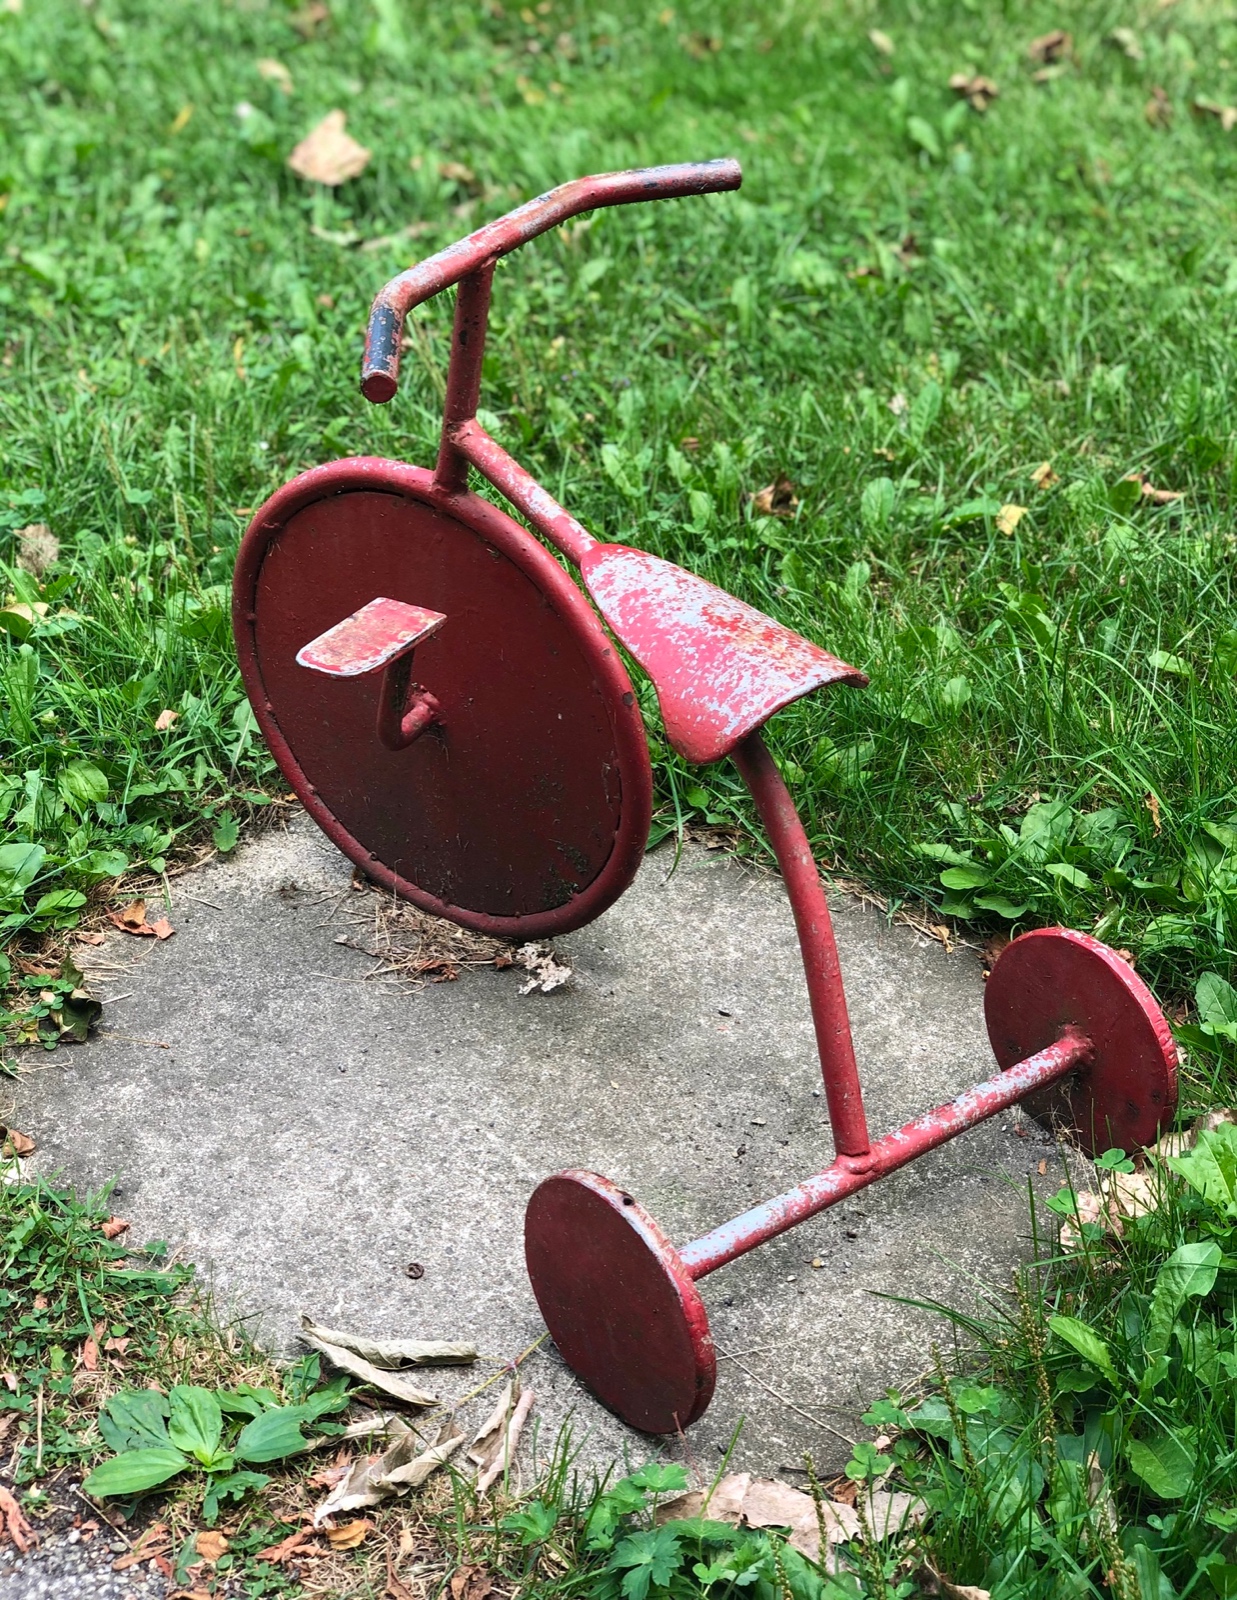 The Little Red Bike